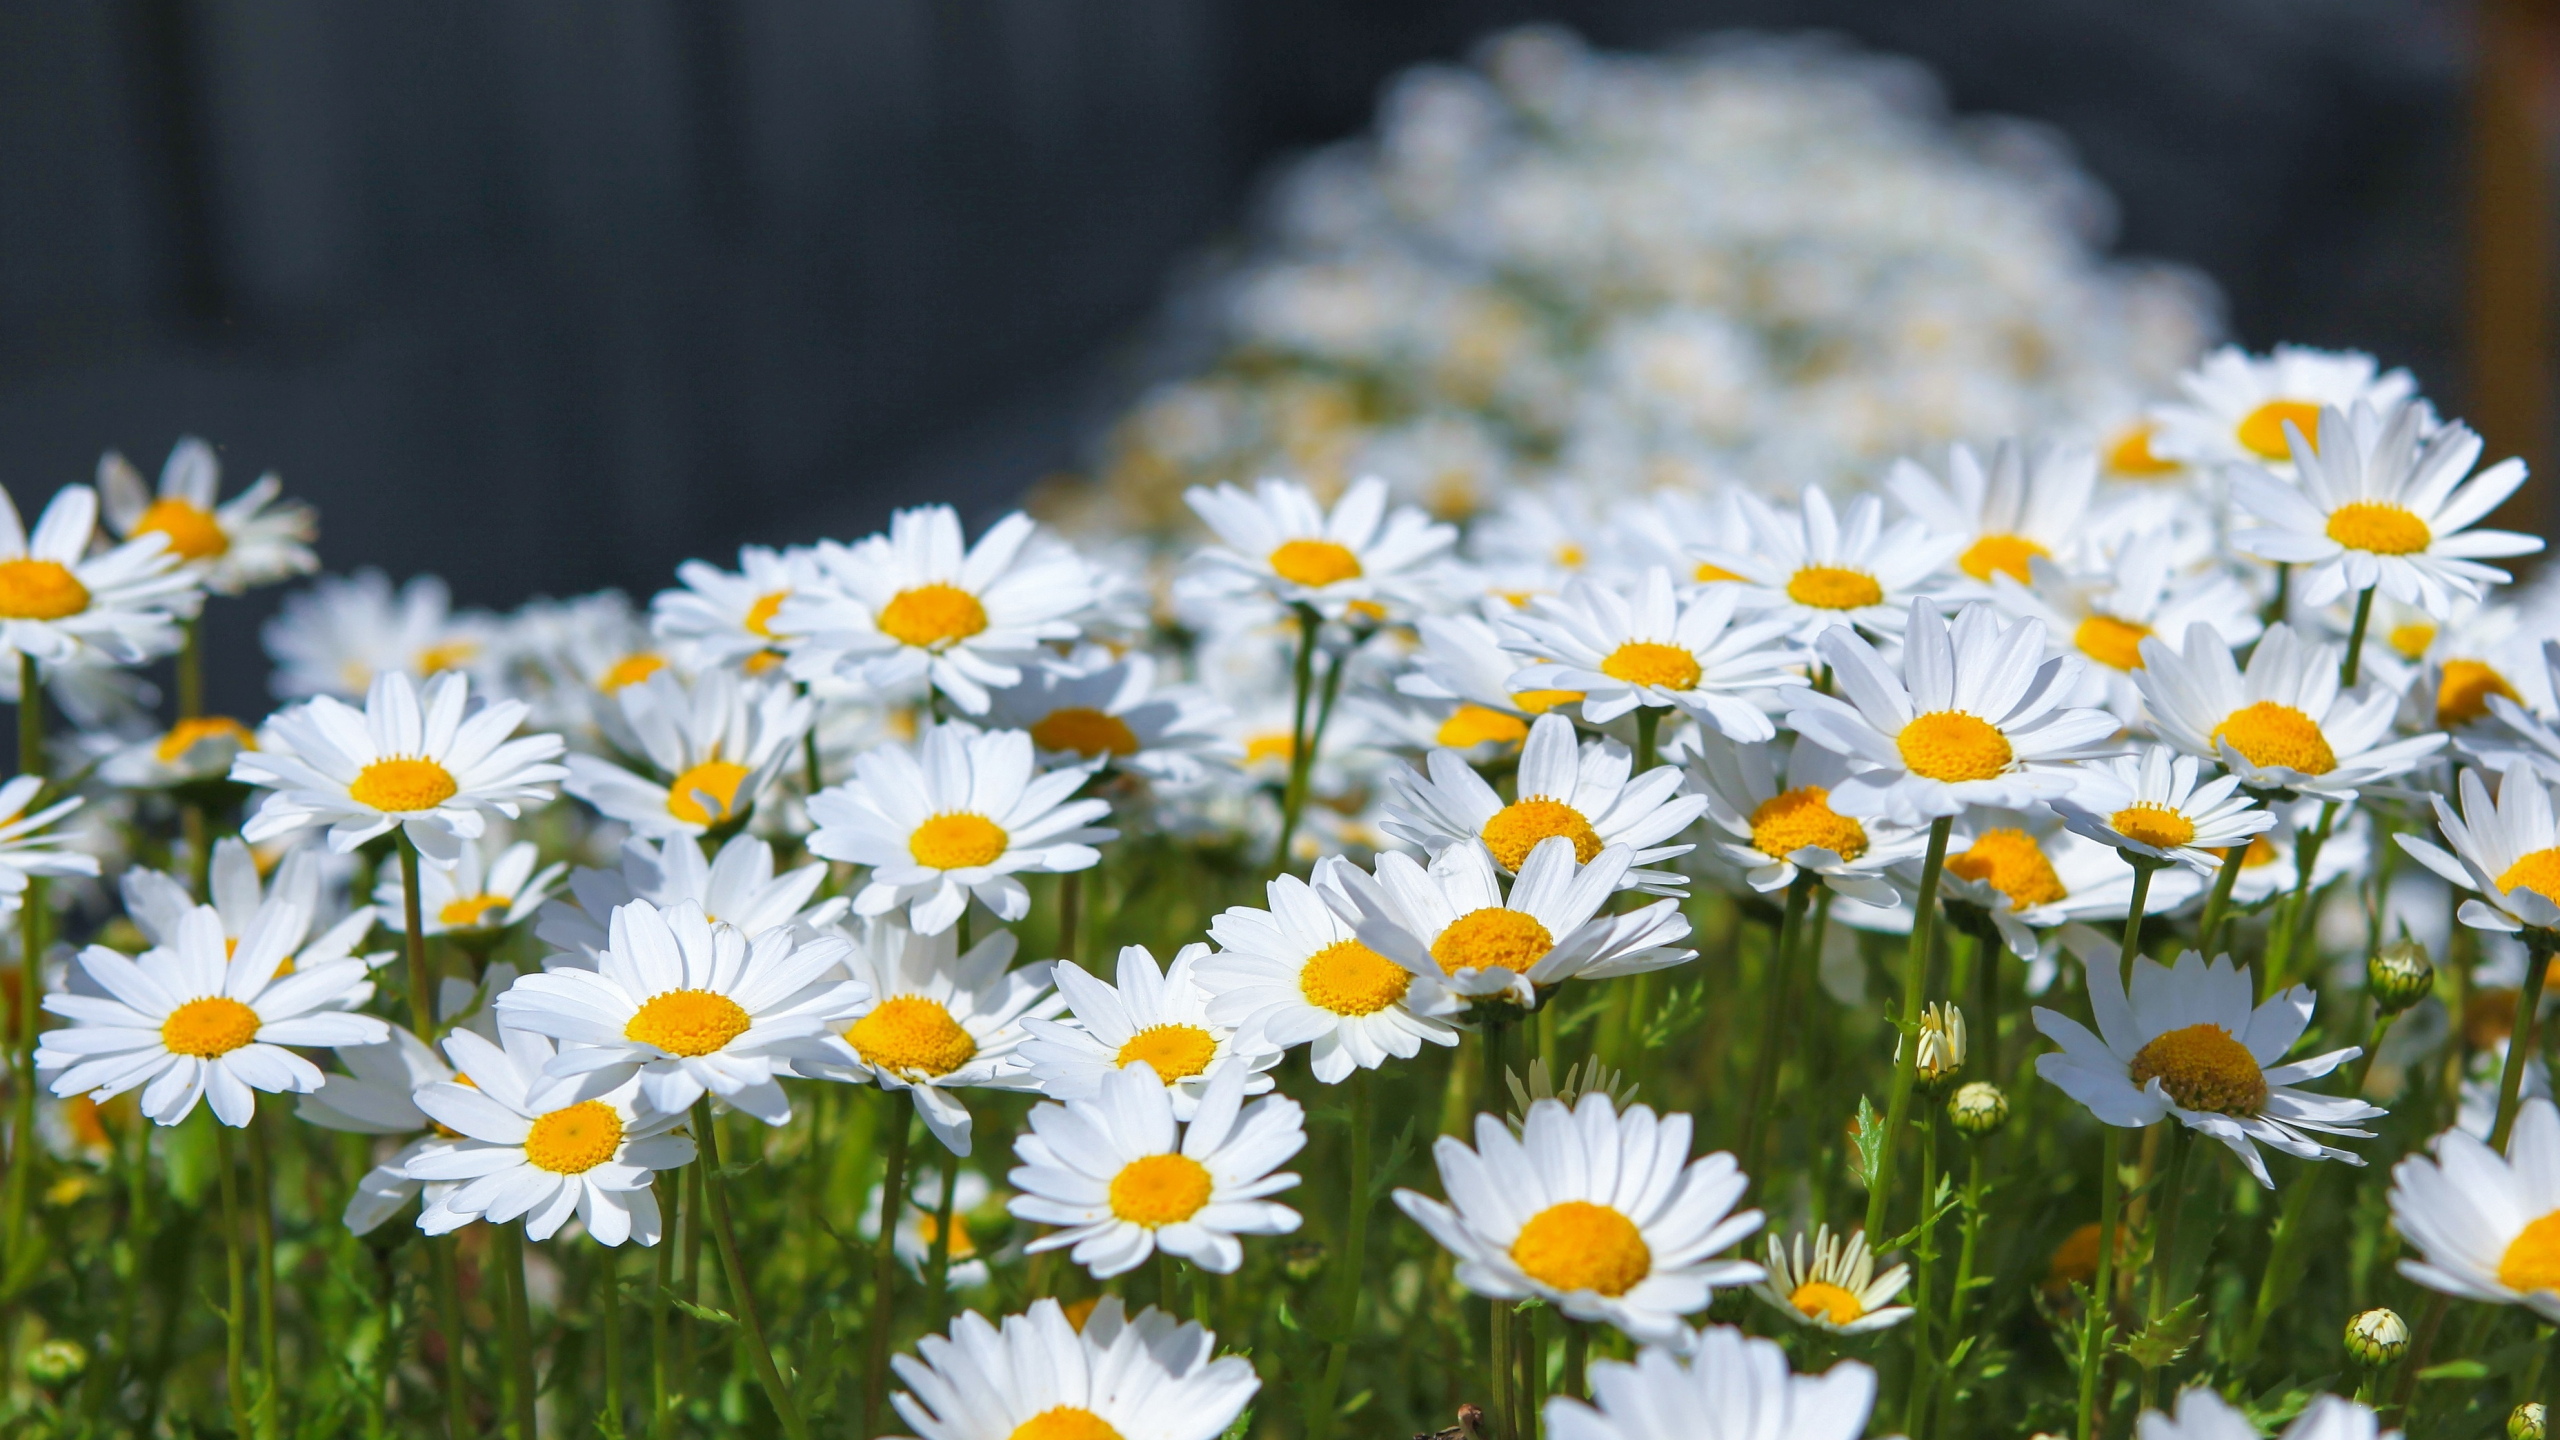 Meadow, spring, flowers, white daisy, 2560x1440 wallpaper